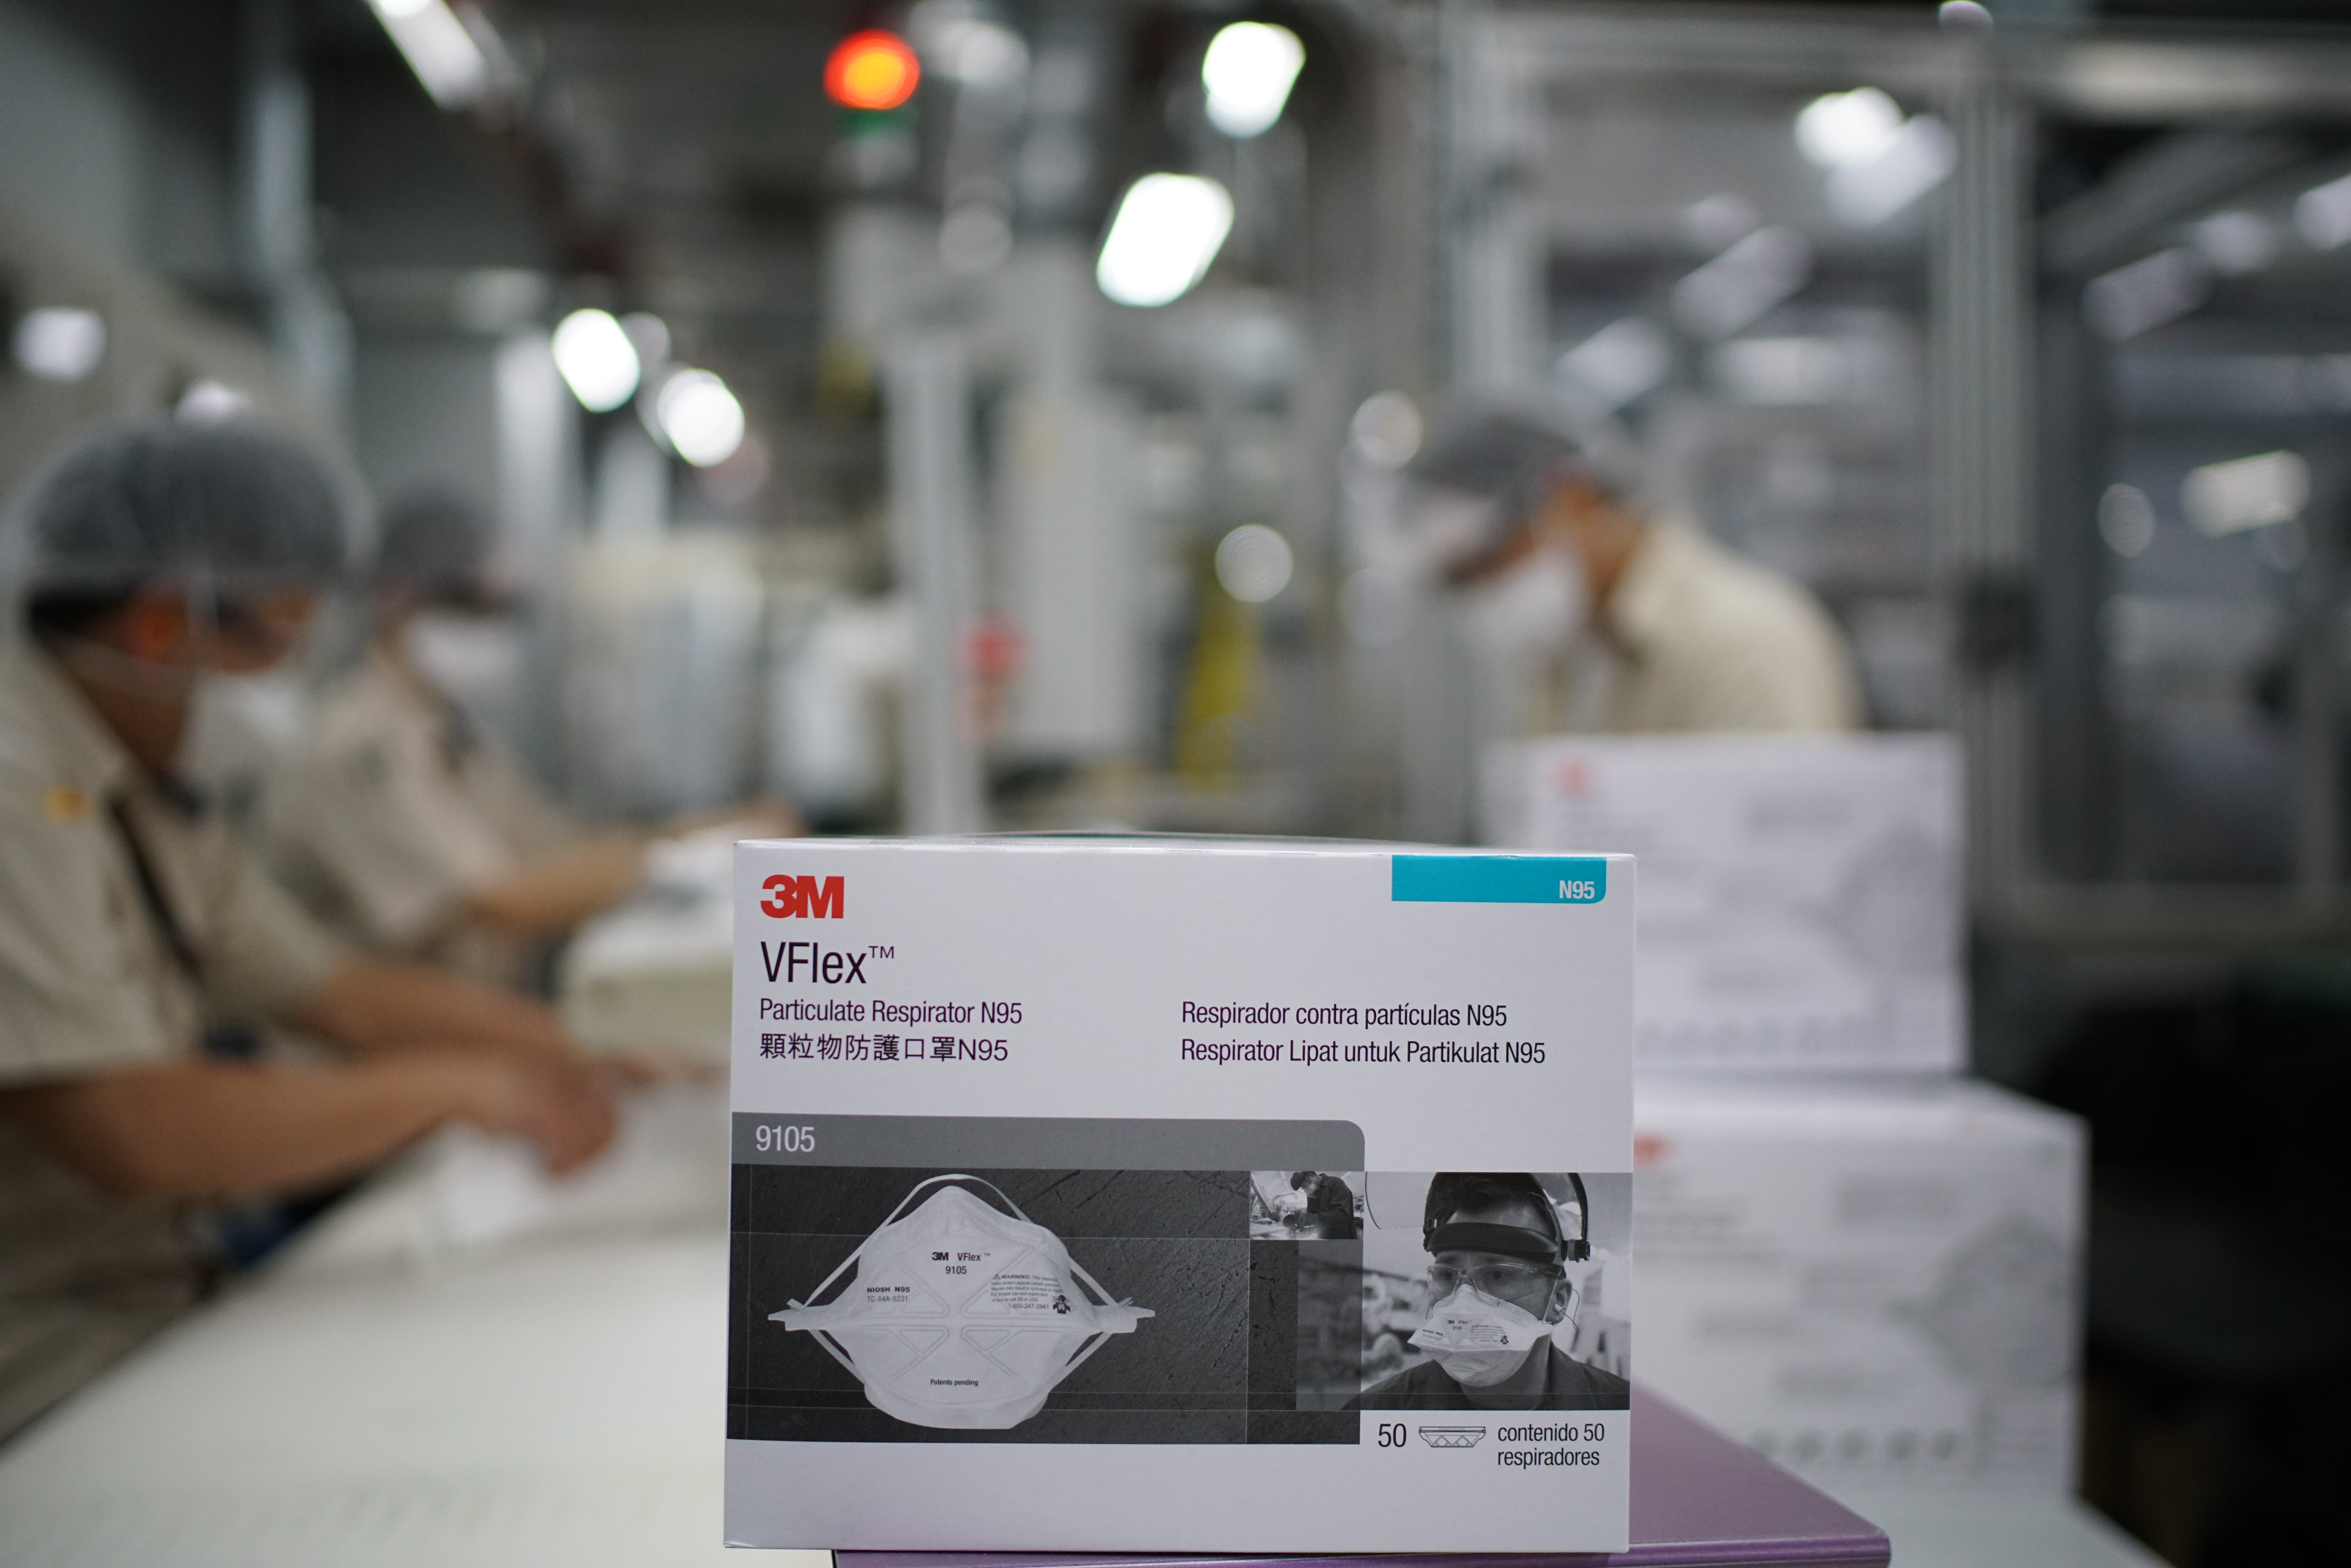 3M is helping authorities to prevent scammers from selling fake N95 masks